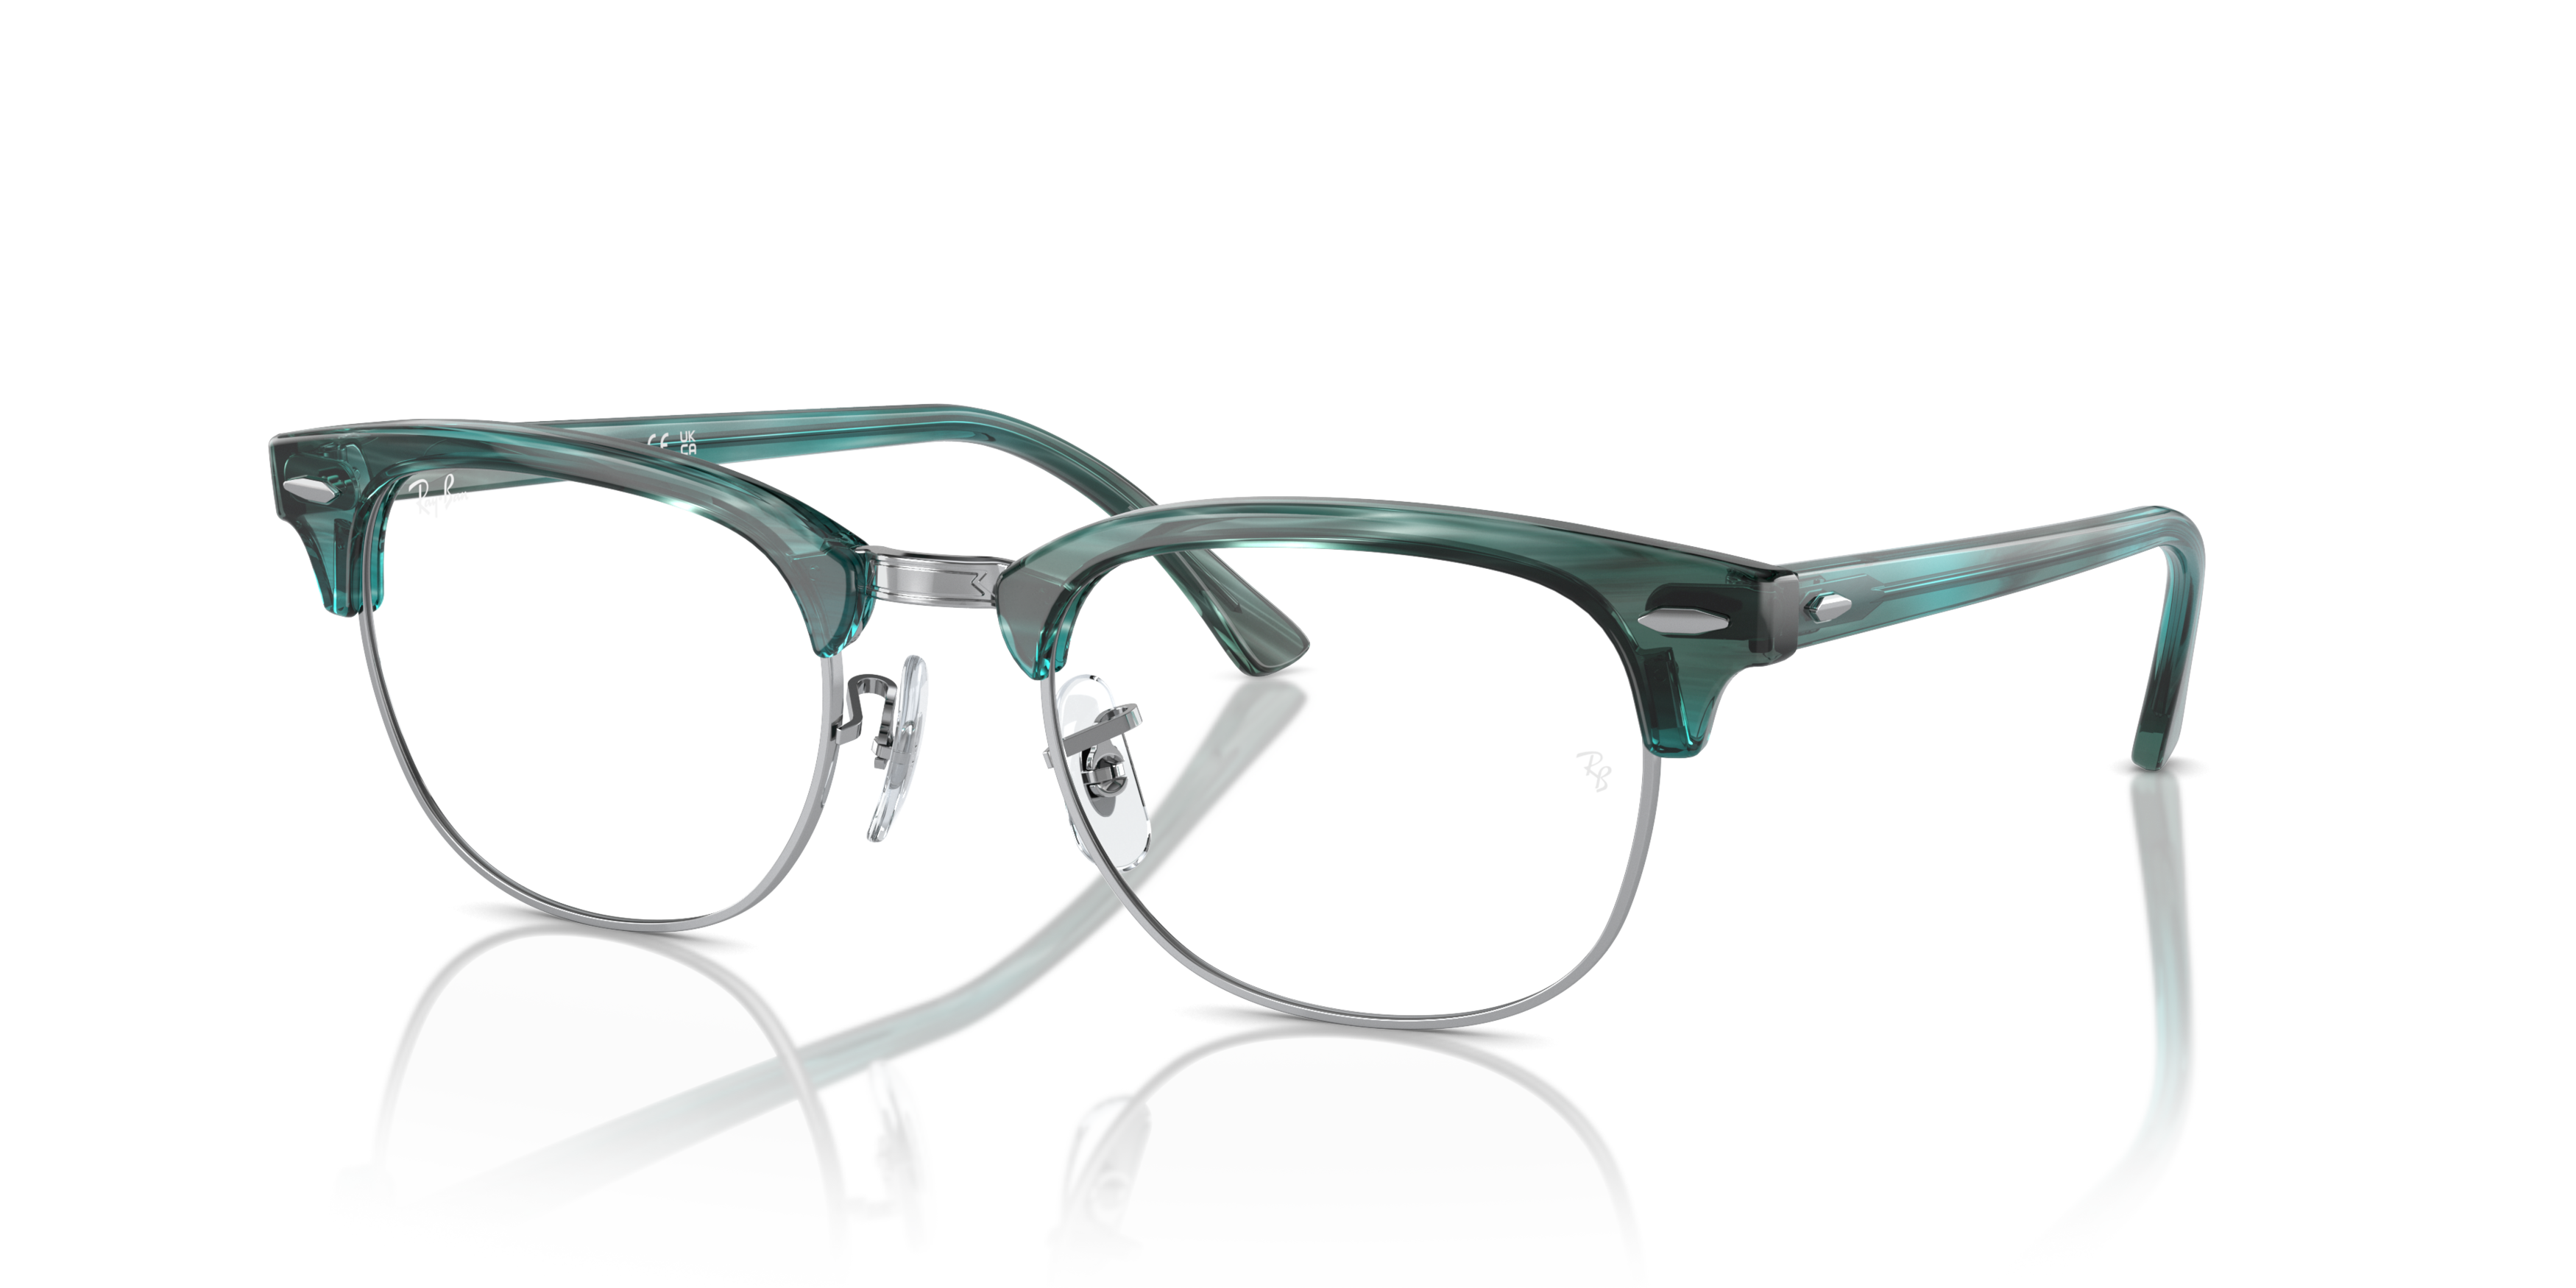 Angle_Left01 Ray-Ban RX5154 8377 Groen, Zilver